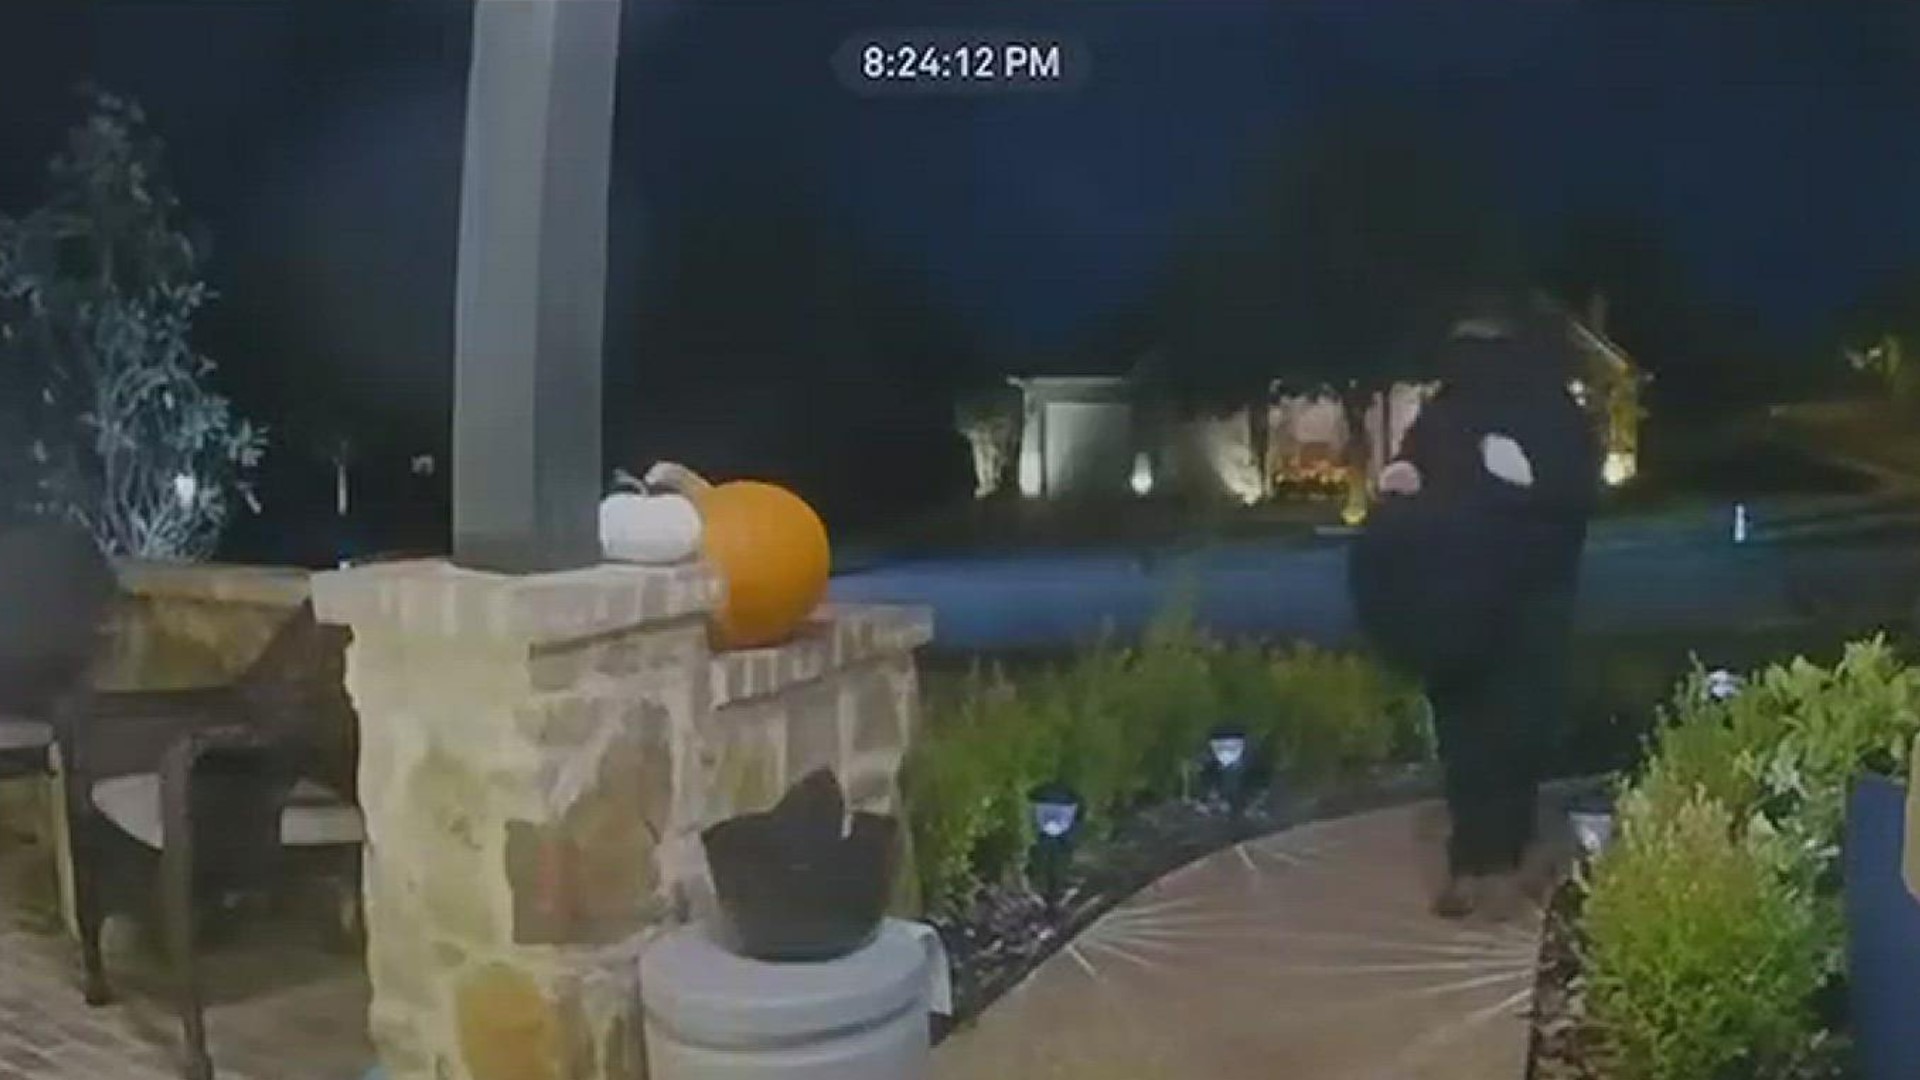 McKinney officers were dispatched to a home after the homeowner’s camera caught someone putting candy into a bowl on the front porch.